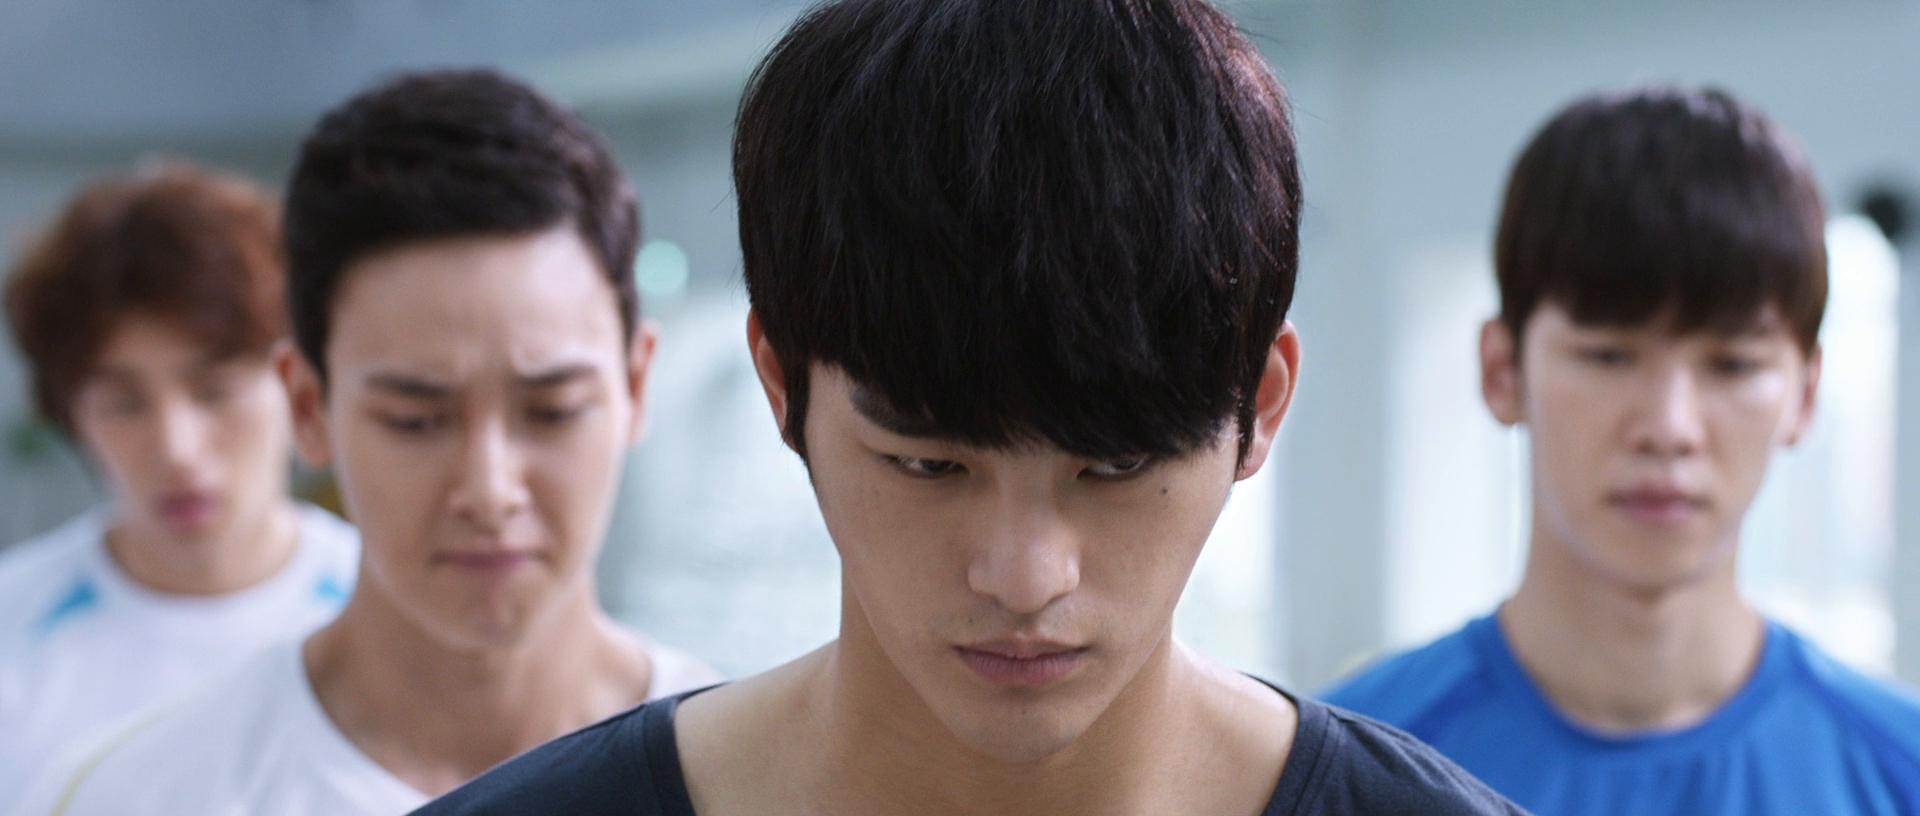 Ϣ No Breathing 2013 1080p BluRay x264 DTS-WiKi 11.91GB-5.png